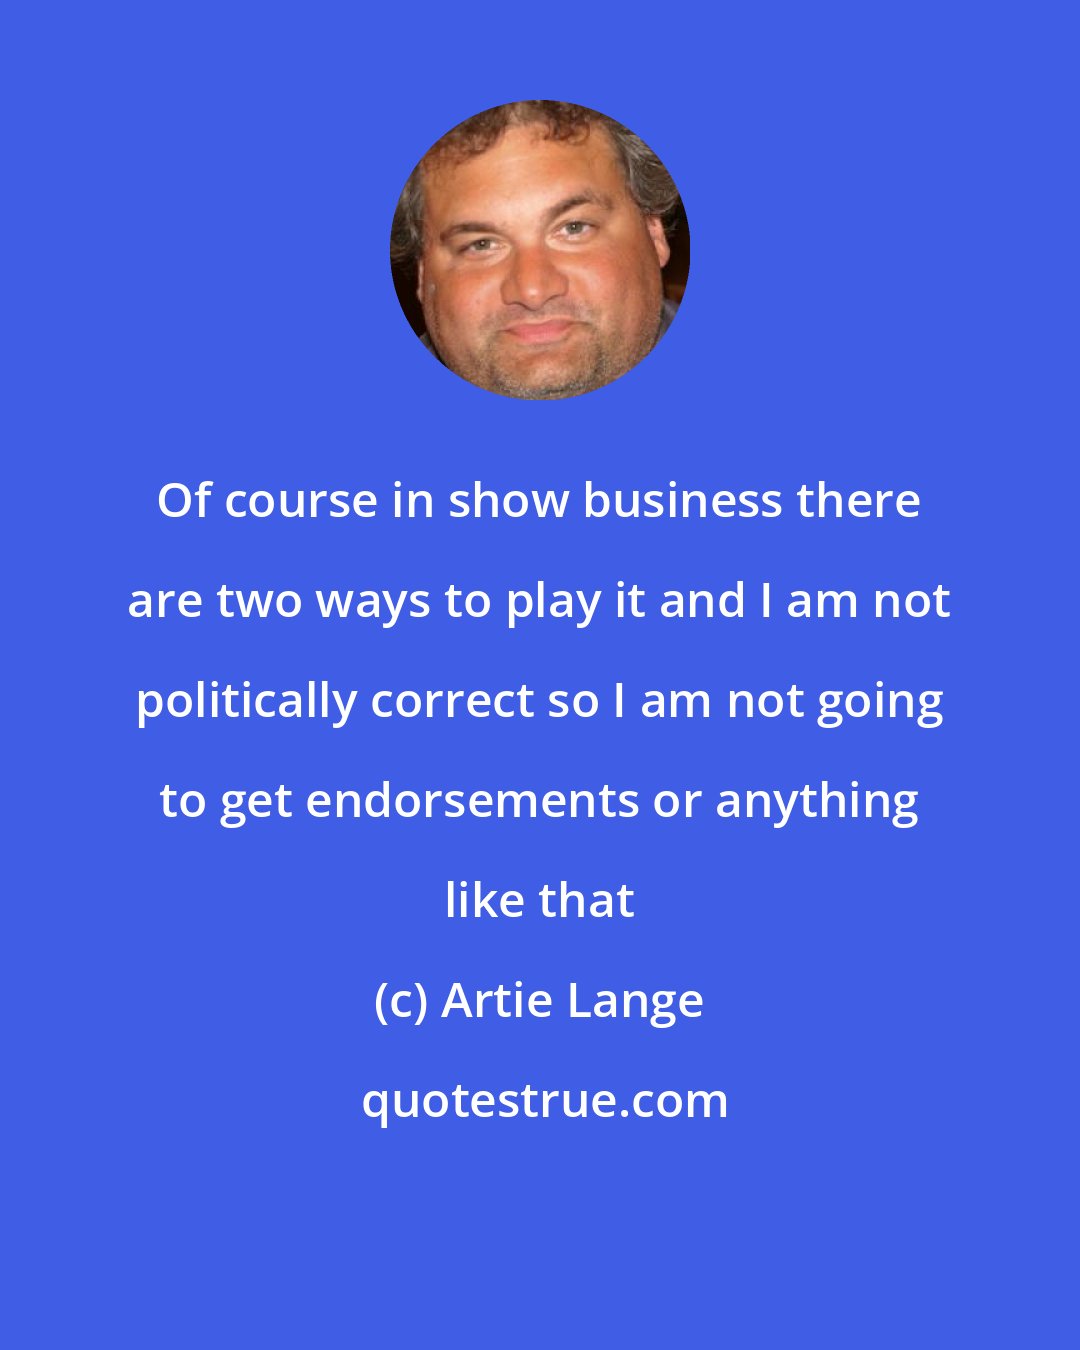 Artie Lange: Of course in show business there are two ways to play it and I am not politically correct so I am not going to get endorsements or anything like that